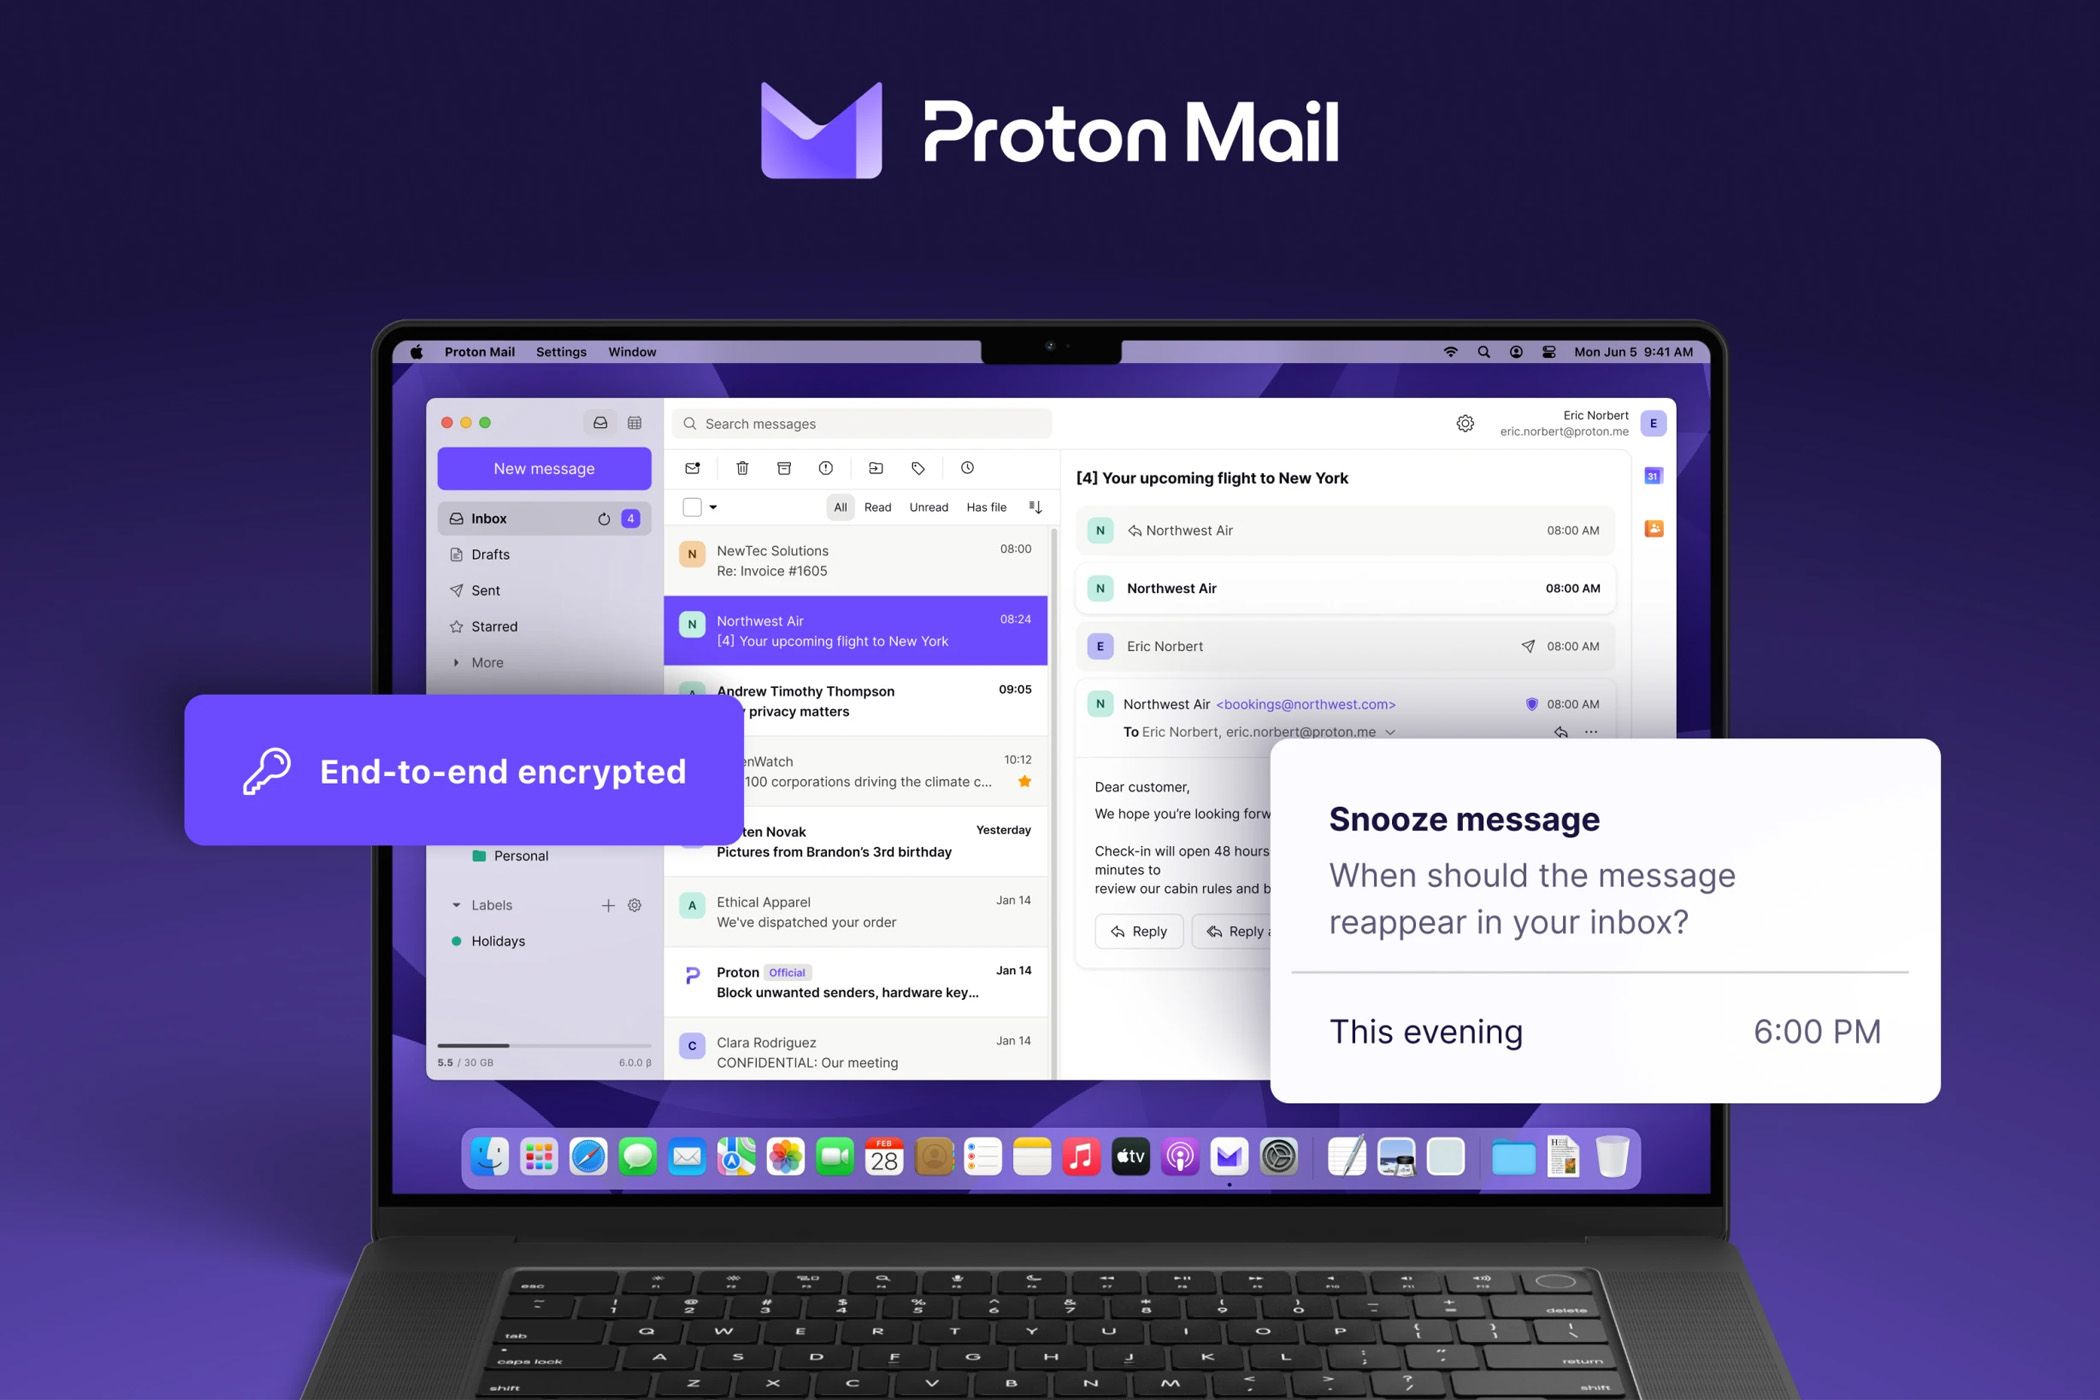 Screenshots of Proton Mail on a laptop